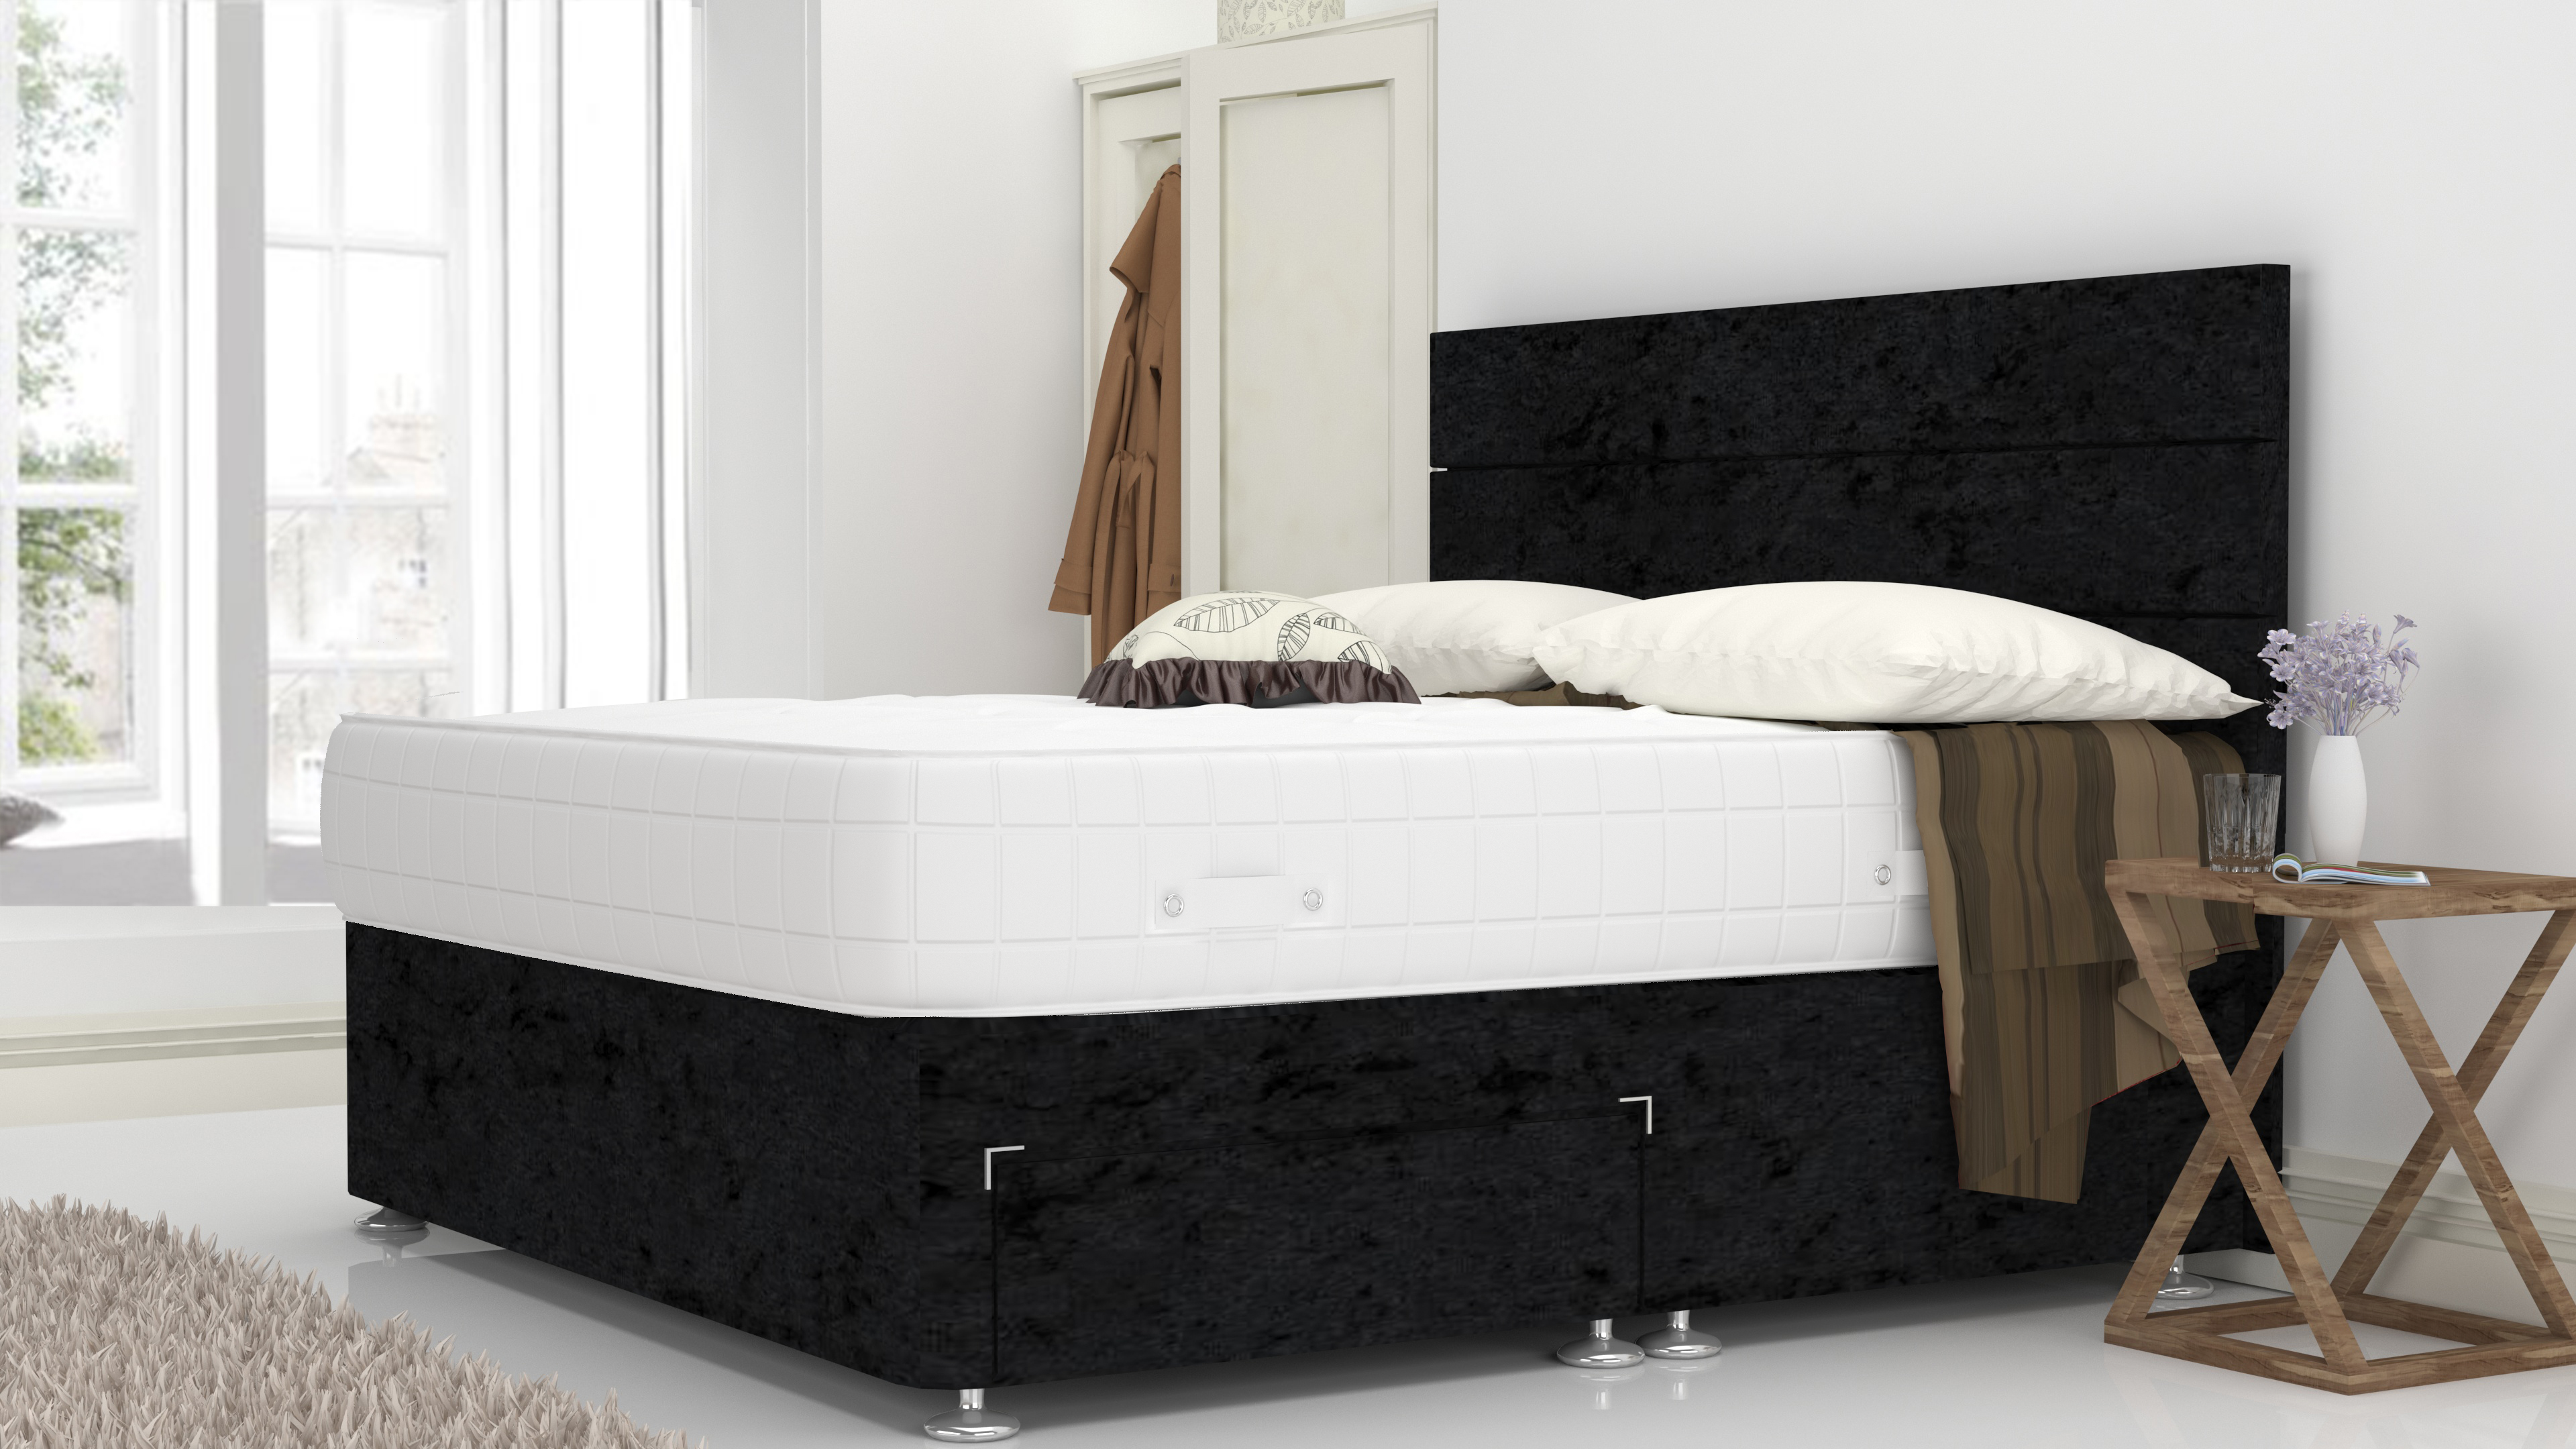 Black Crushed 4FT 6" Divan Bed Set With 3 Panel Headboard (Included Feet) And Free Pillow Top Mattress